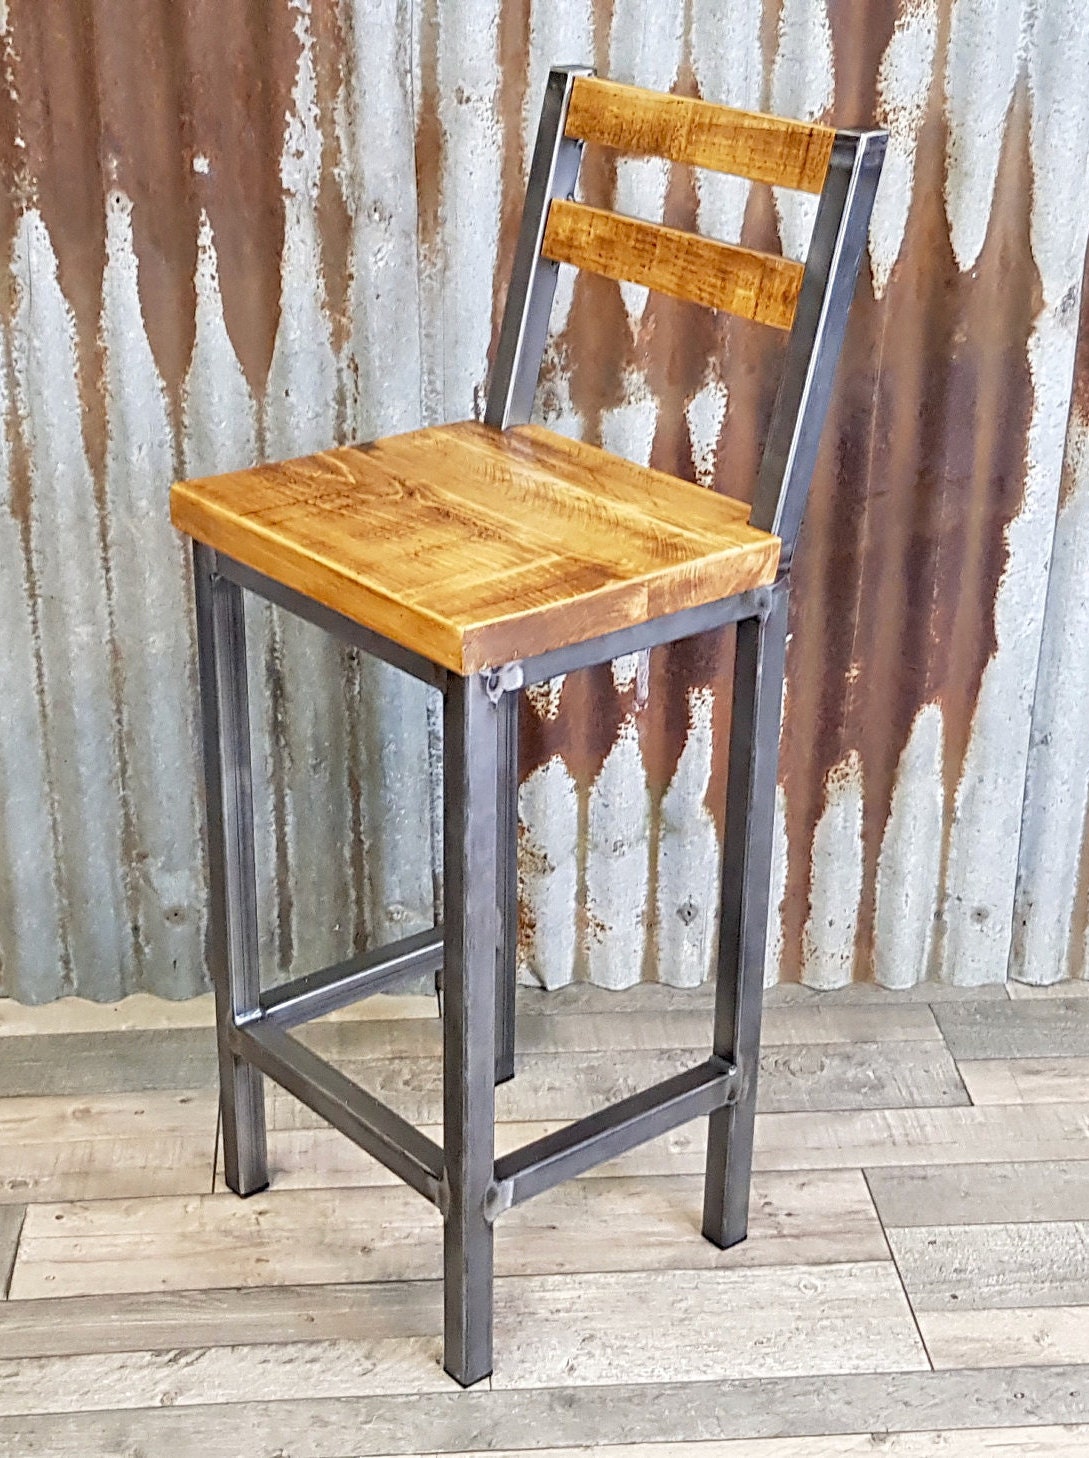 Industrial style bar stools for high poseur tables, breakfast bar